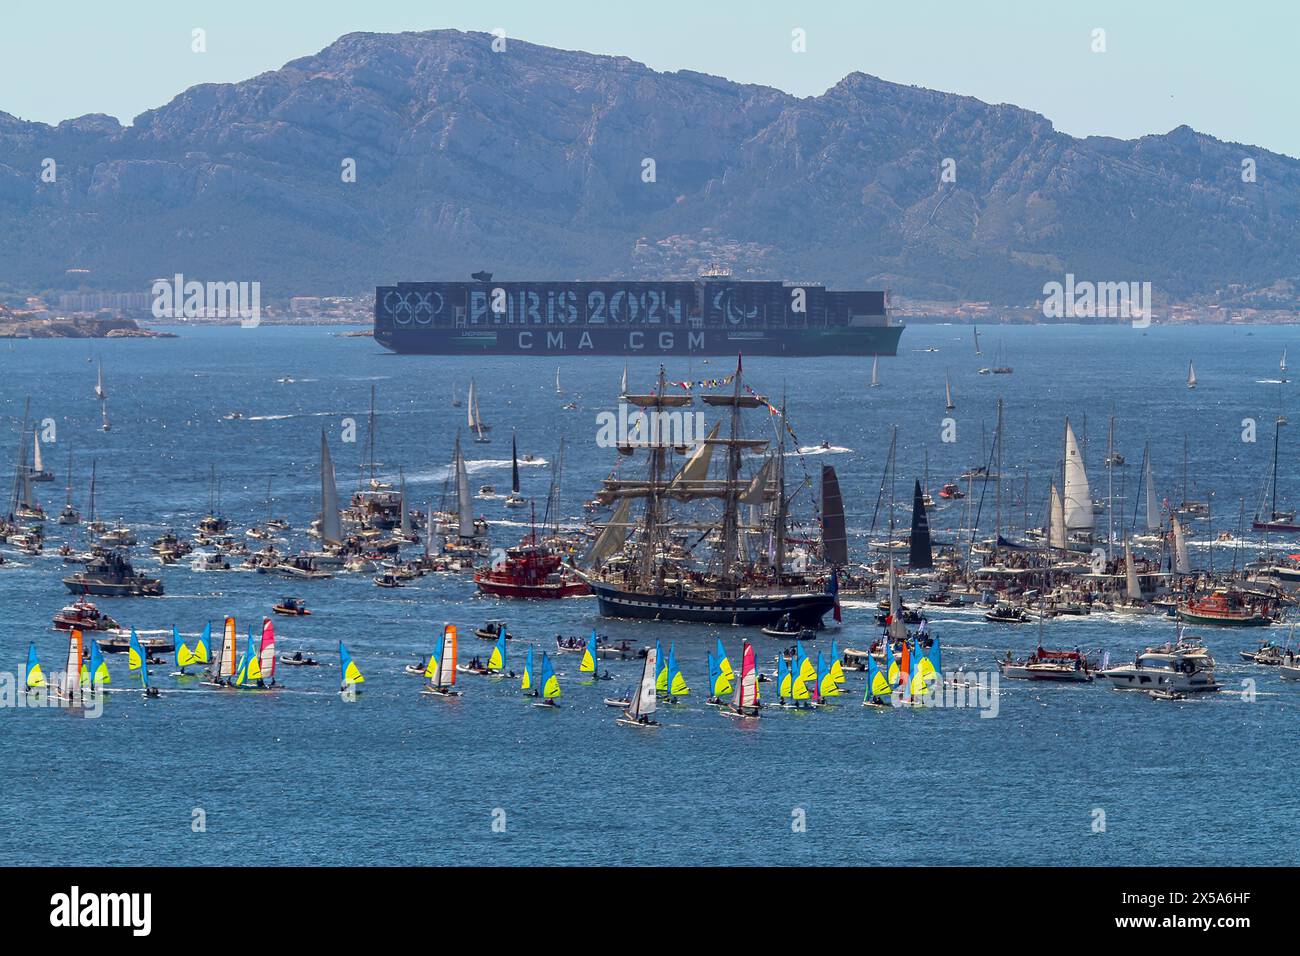 The French three-masted ship “Belem” arrives in Marseille. Coming from Athens with the Olympic flame on board, the Belem arrives in the harbor of Marseille and parades along the coast of the city of Marseille surrounded by thousand of boats. Stock Photo